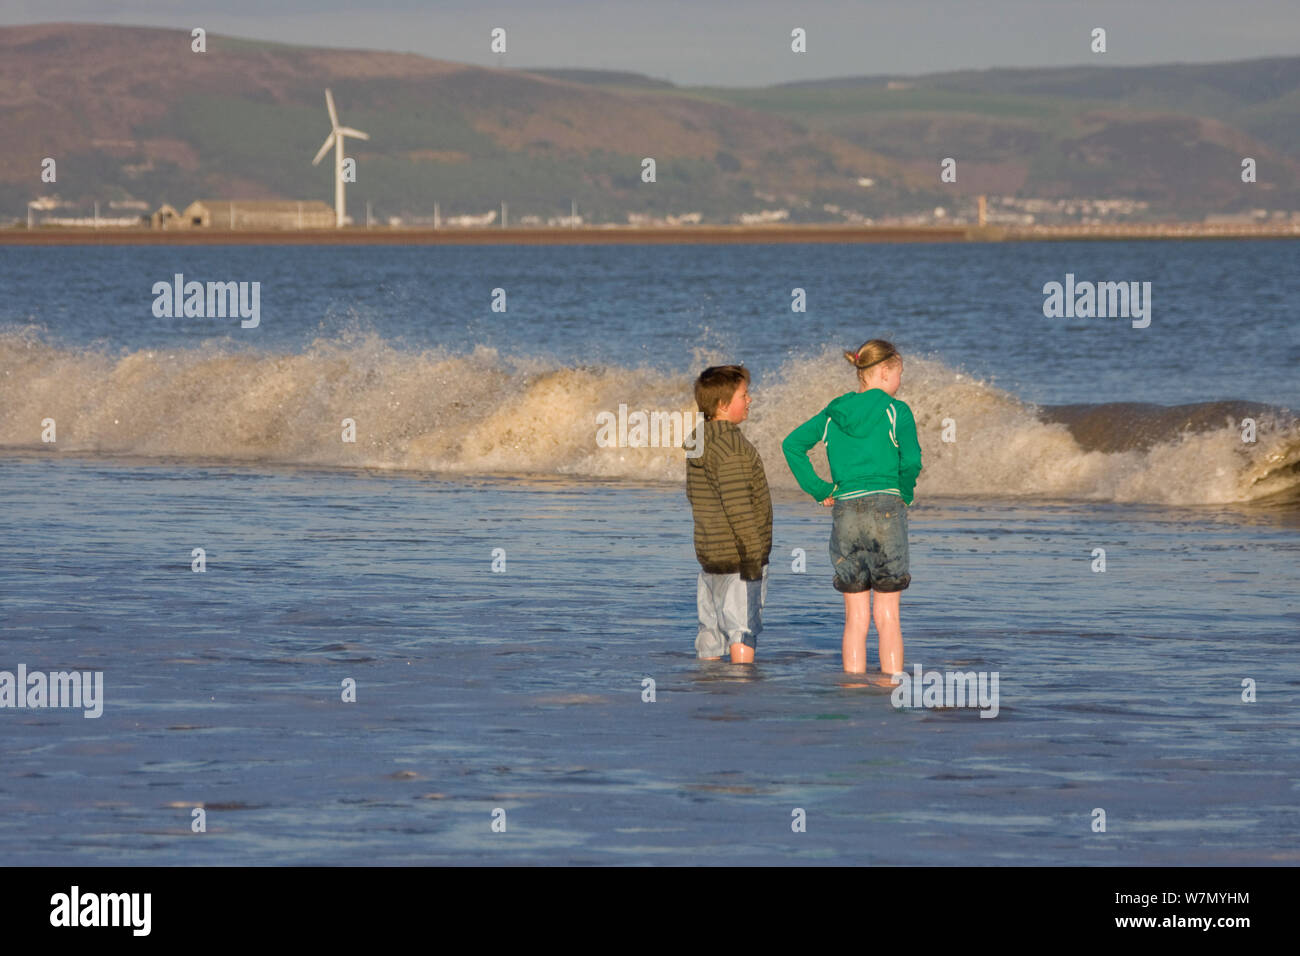 Children standing in shallows of sea, Swansea Bay, Wales, UK 2009 No MR so not sent to website Stock Photo